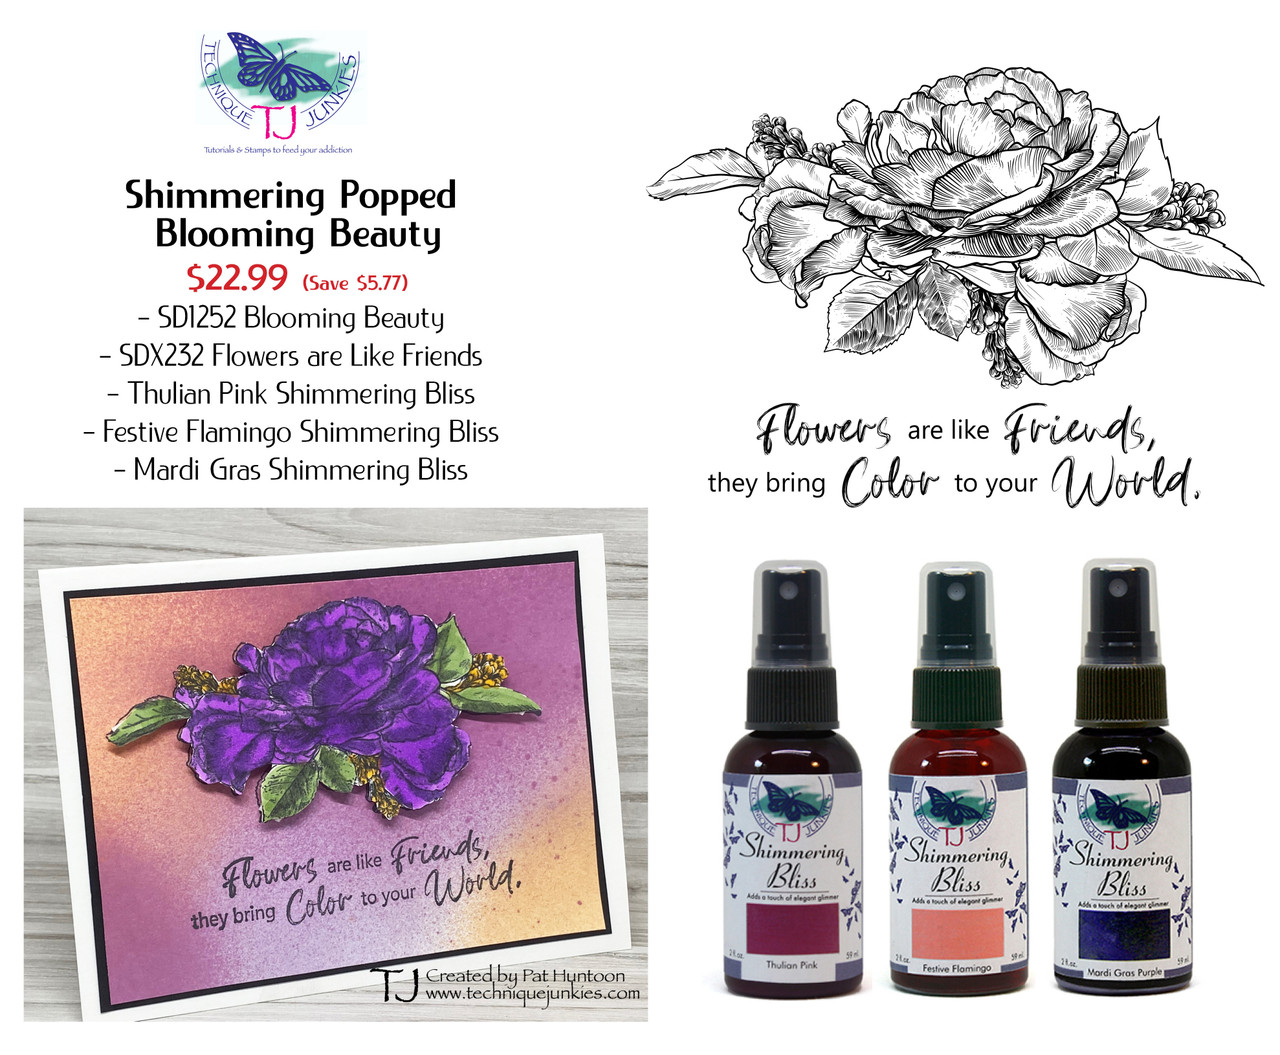 shimmering_popped_blooming_beauty_kit__01932 image